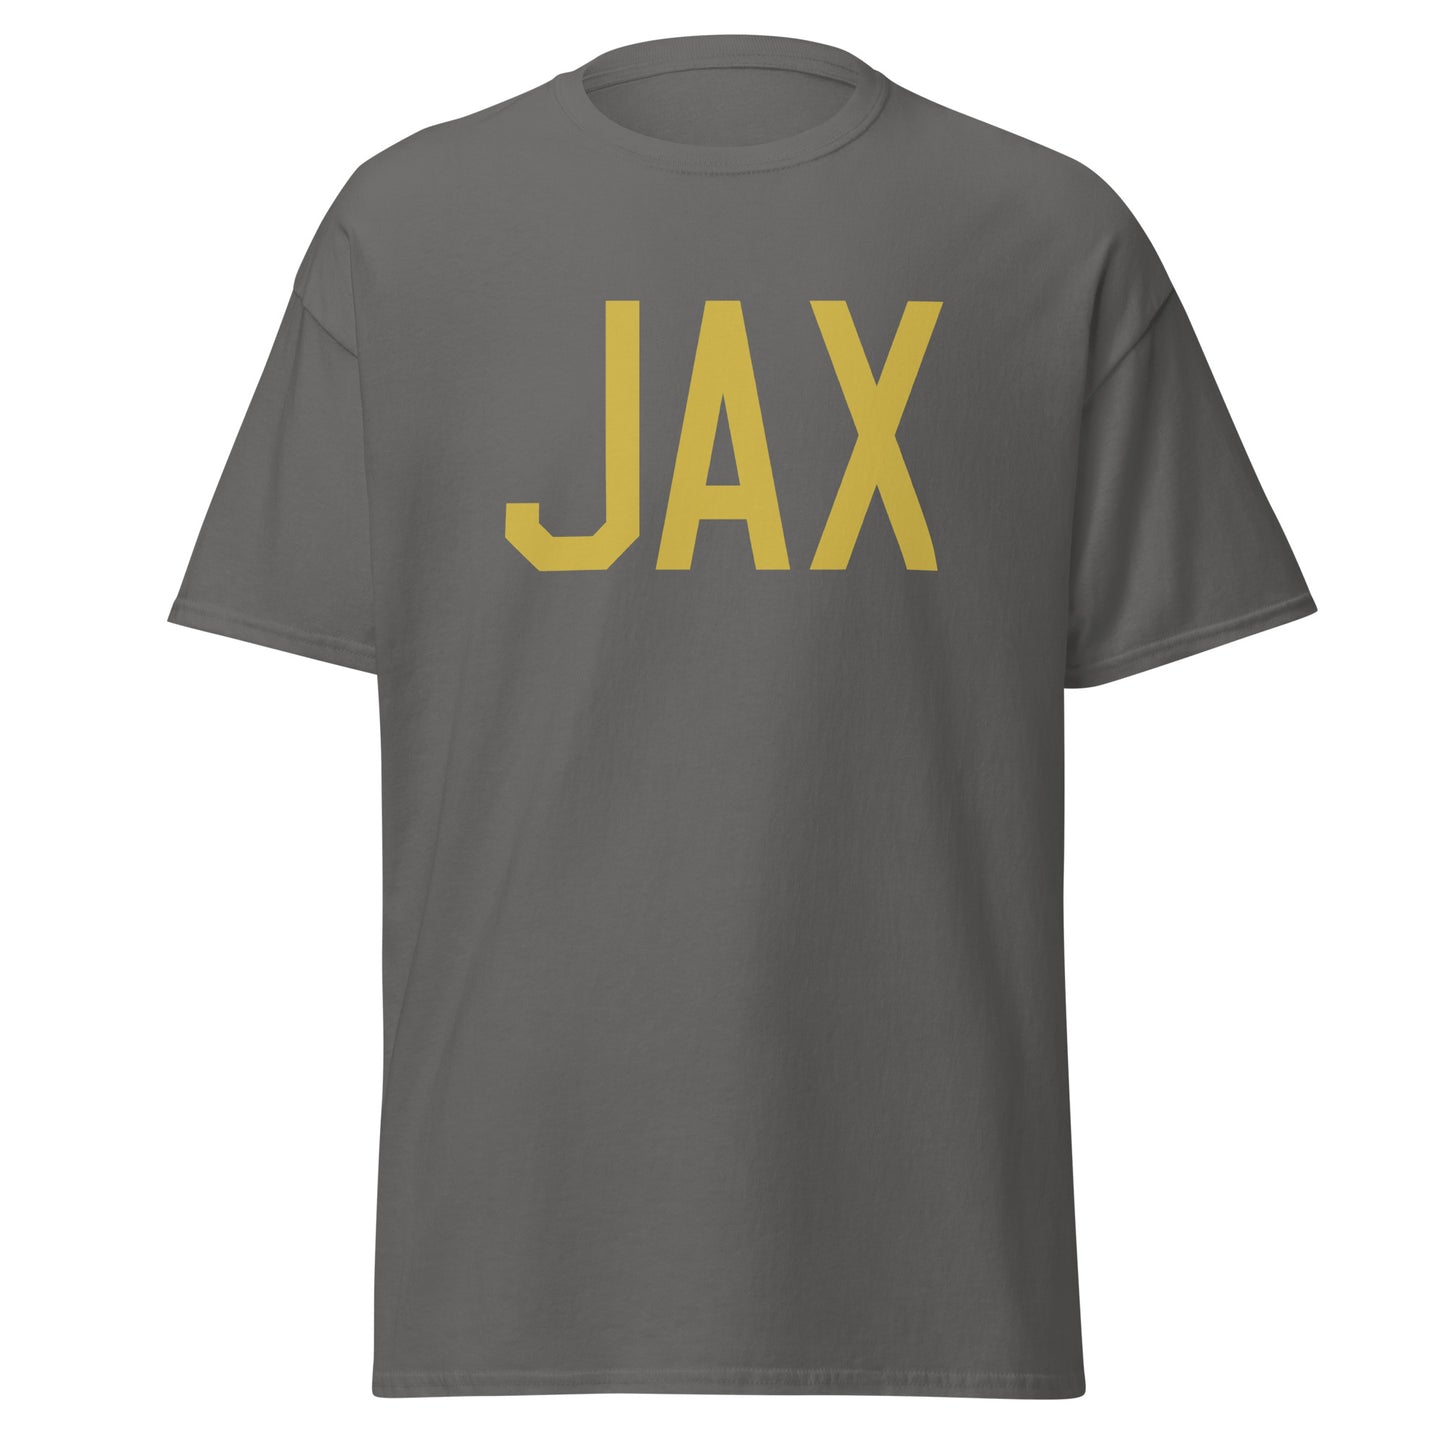 Aviation Enthusiast Men's Tee - Old Gold Graphic • JAX Jacksonville • YHM Designs - Image 05